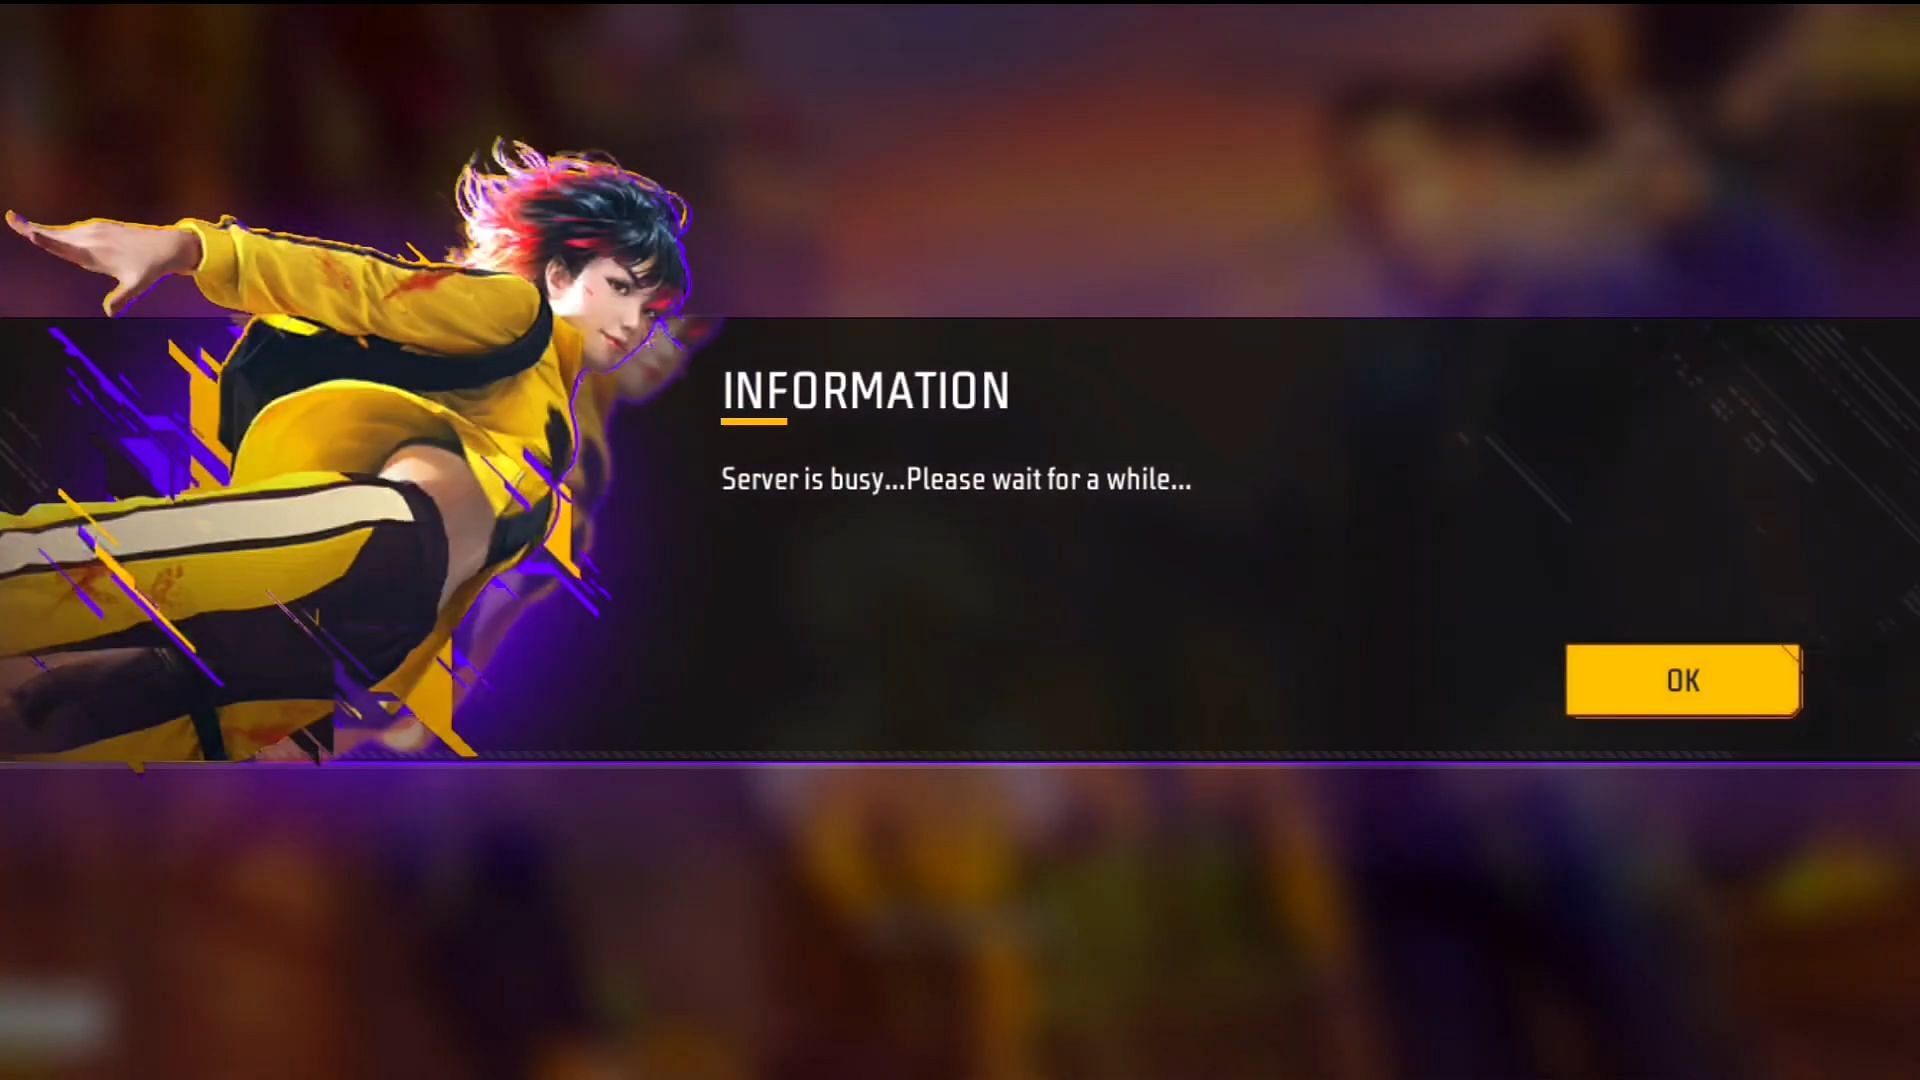 This is one of the errors that players are encountering while trying to log in (Image via Garena)